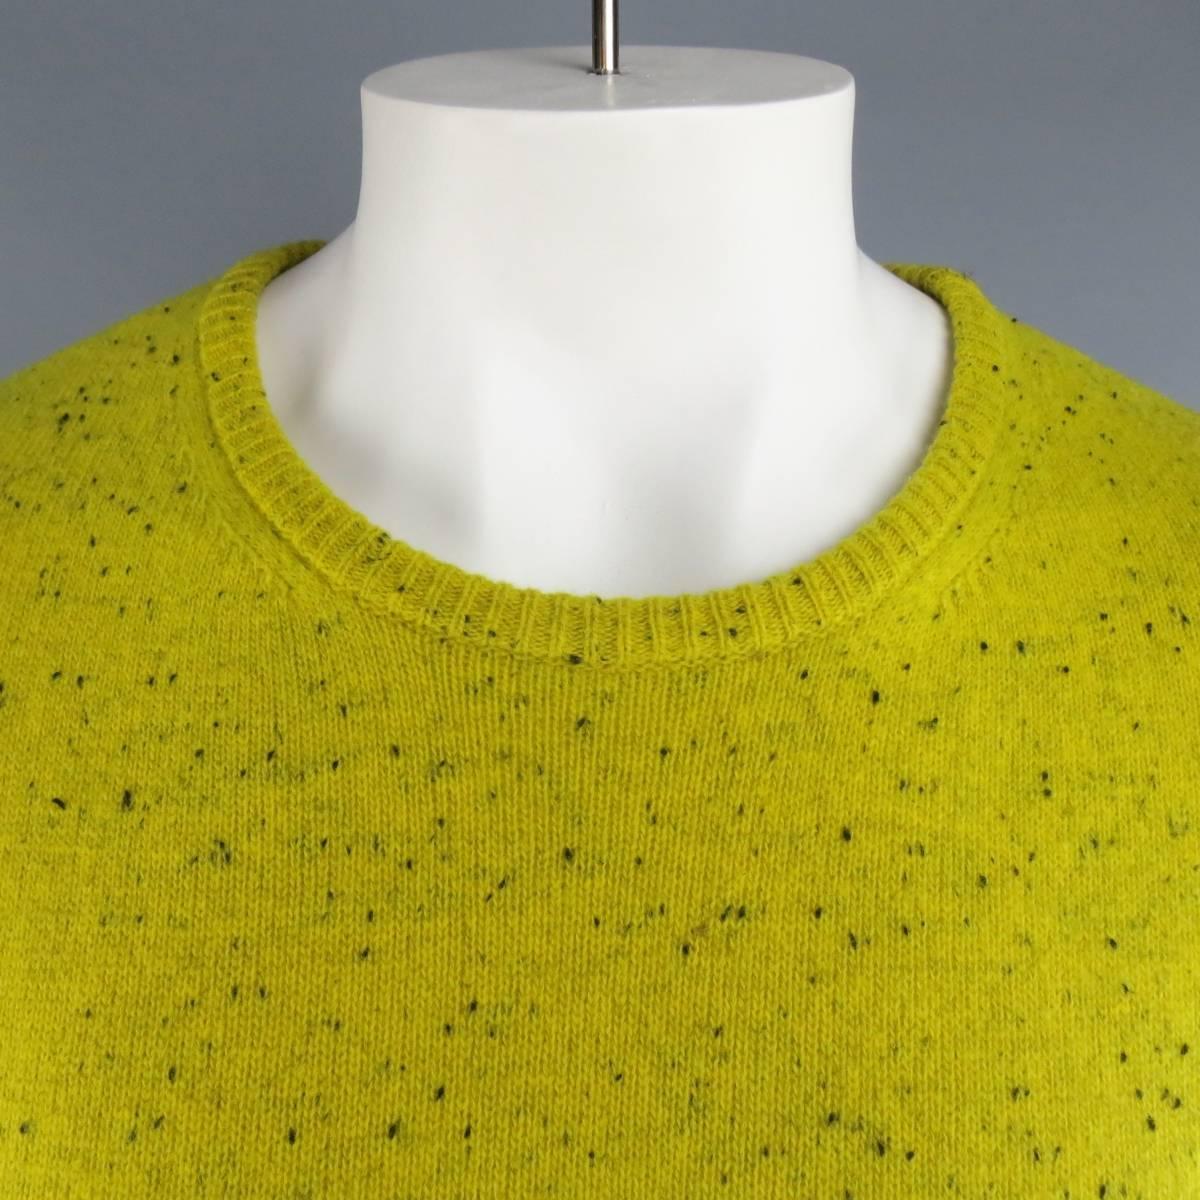 RAF SIMONS crewneck pullover sweater in a black speckled chartreuse yellow marino wool knit featuring ribbed cuffs and a cable textured back panel. Made in Italy.
 
Excellent Pre-Owned Condition.
Marked: XL
 
Measurements:
 
Shoulder: 20 in.
Chest: